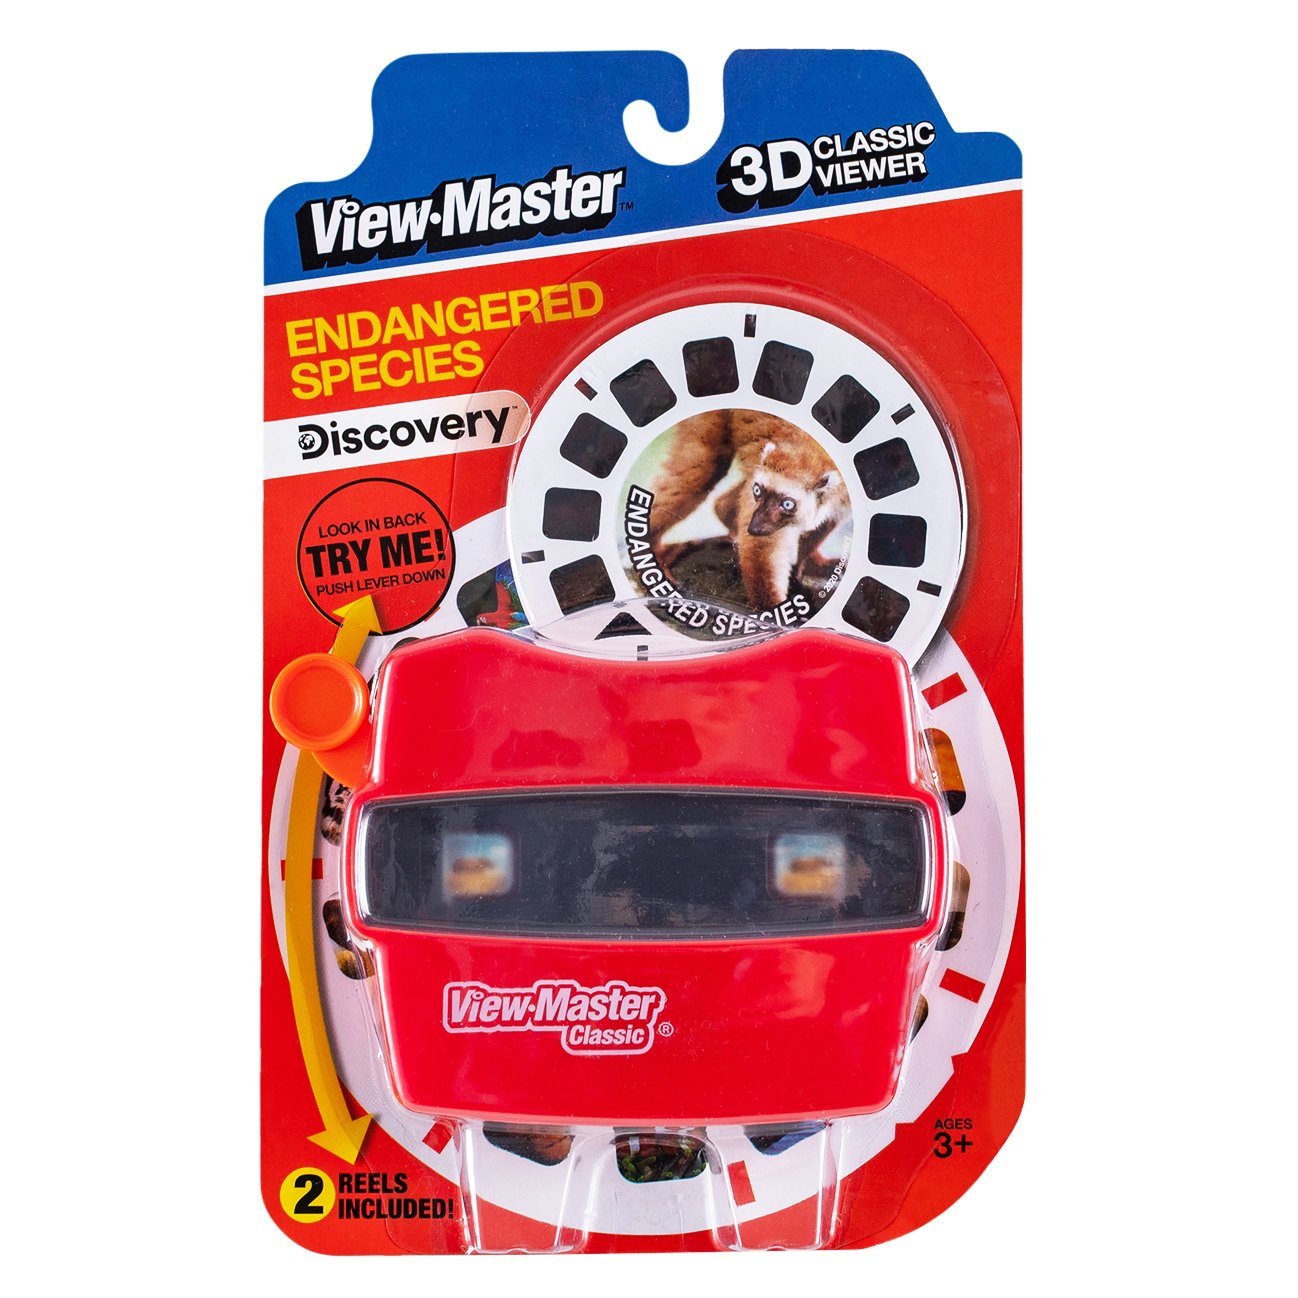 View Master 3D Classic Viewer – Discovery Endangered Species - Shop Toys at  H-E-B